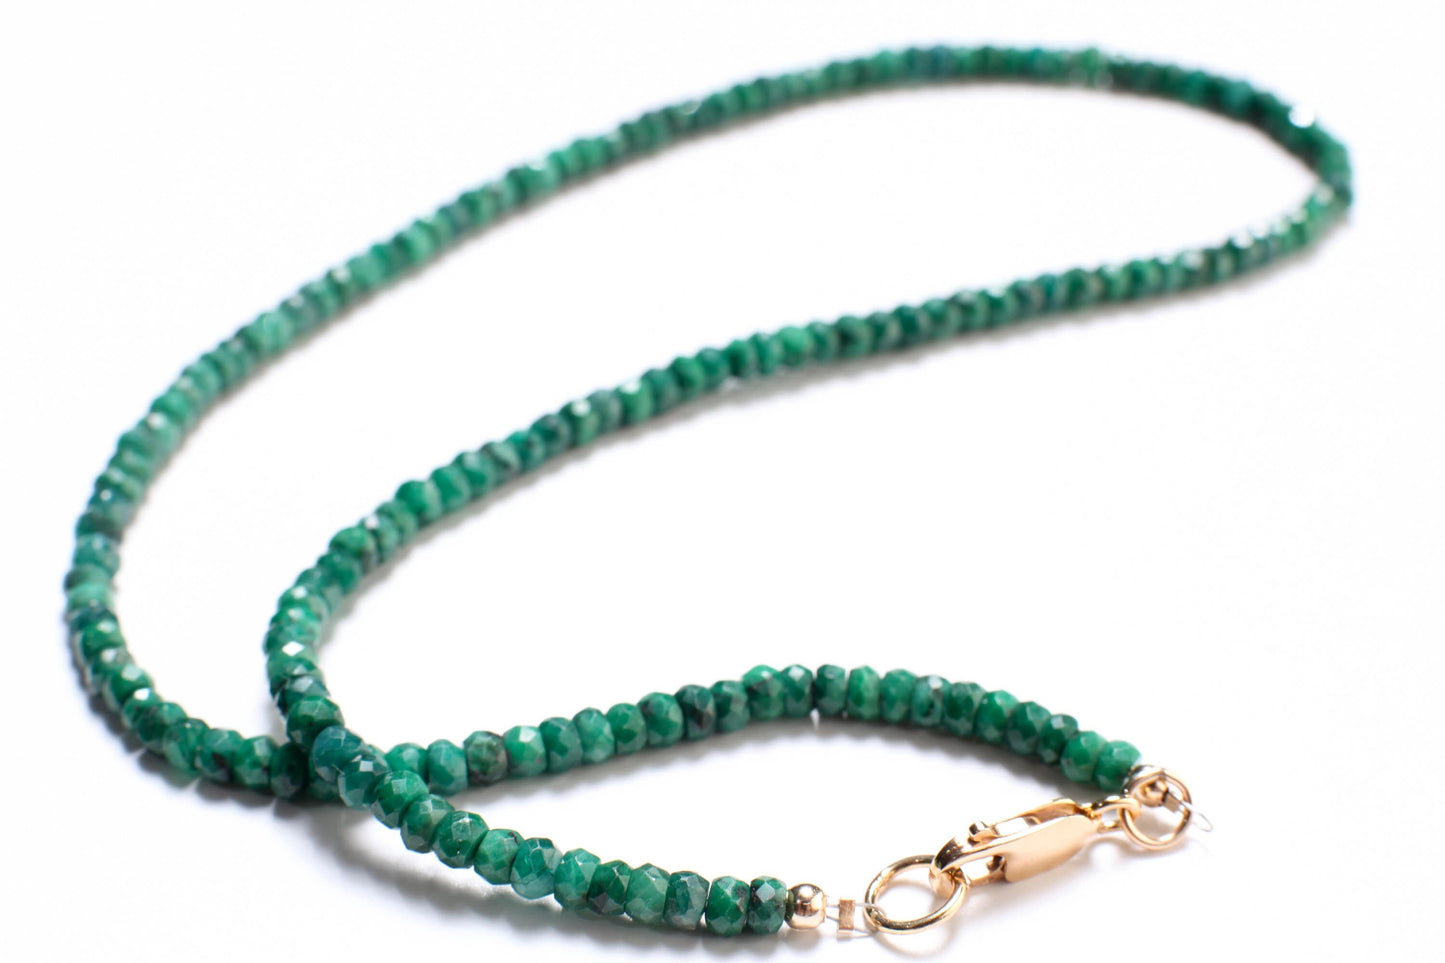 Emerald Necklace, Natural Zambian Emerald 4mm Faceted Roundel Gemstone Beads Necklace in 14k Gold filled